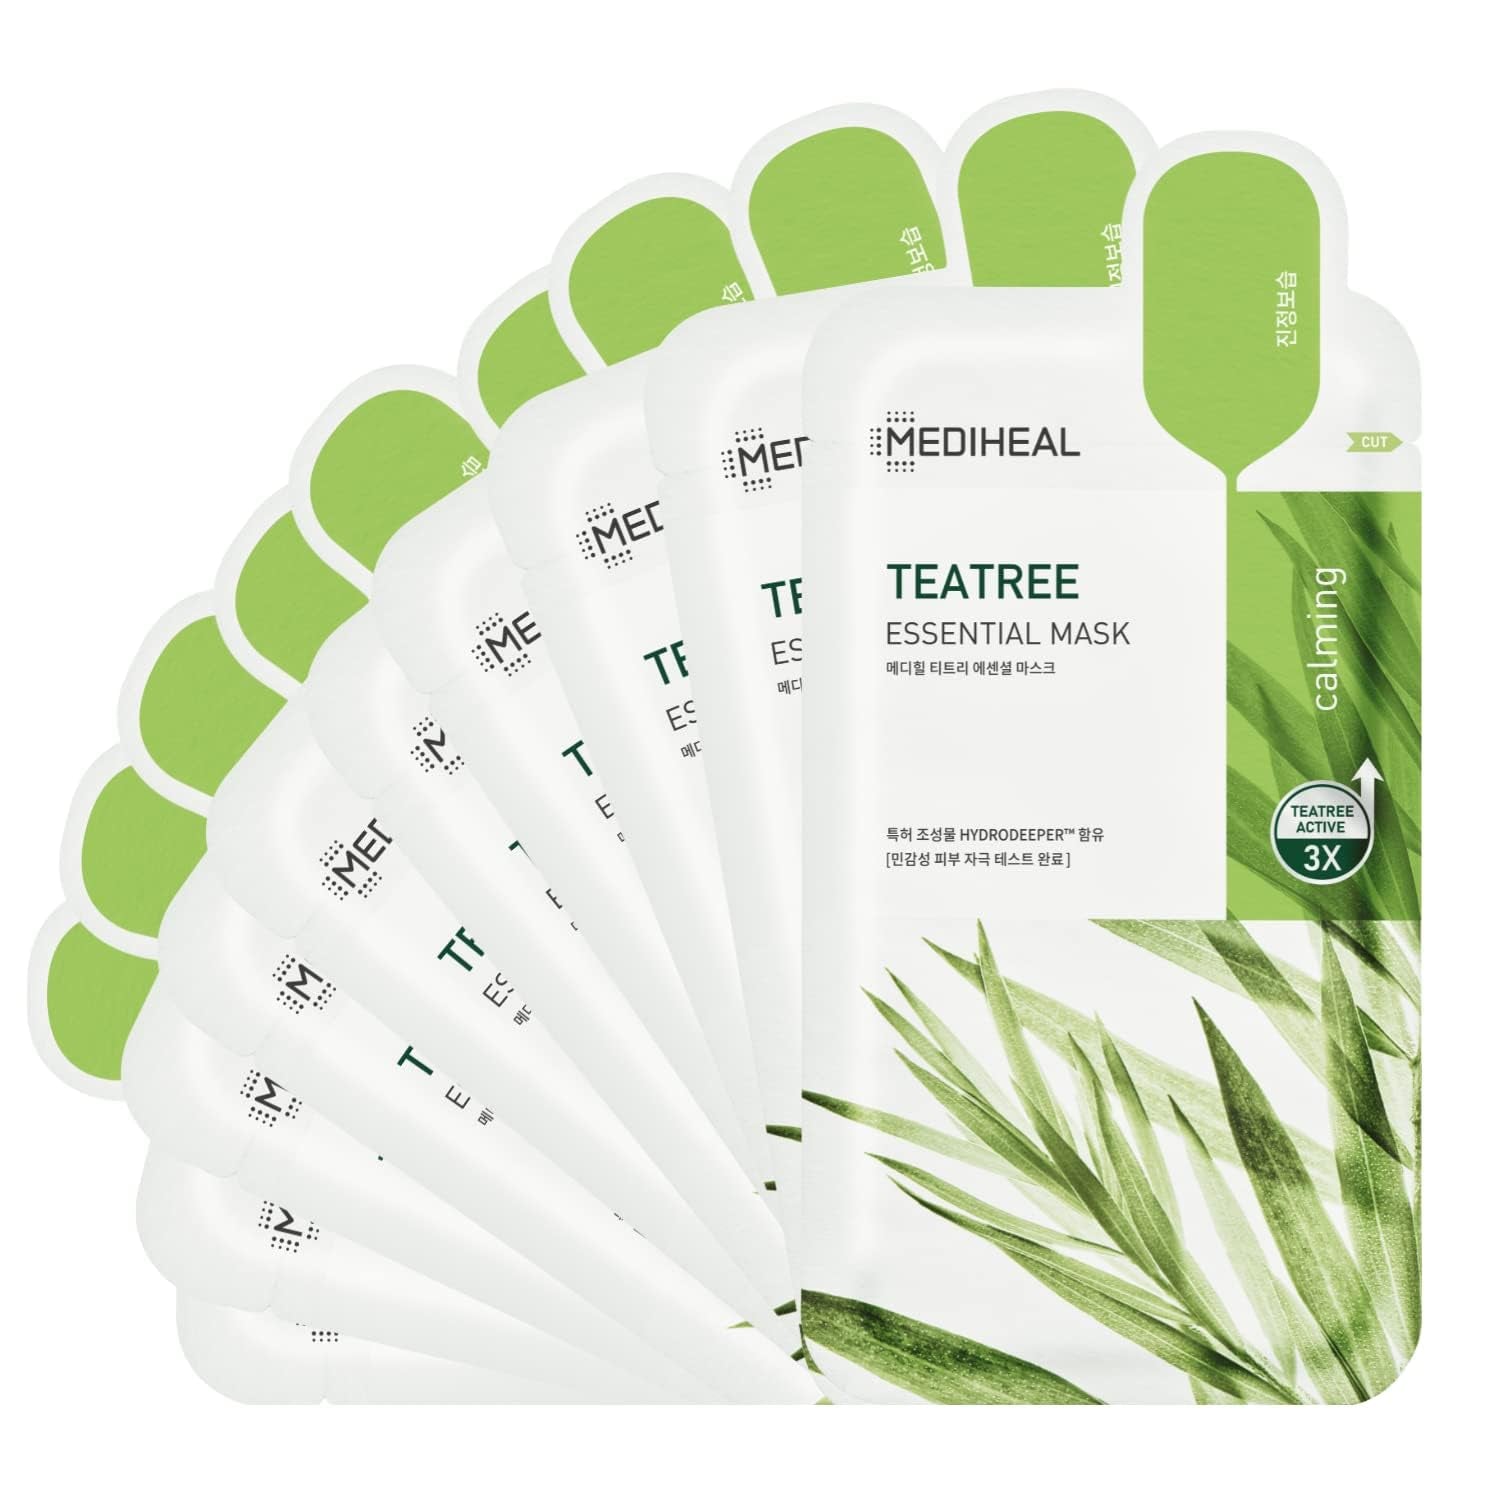 Mediheal Official Best Korean Sheet Mask - Tea Tree Essential Face Mask 20 Sheets Skin Soothing Treat Blemishes Sebum Control for All Skin Types Value Sets Acne Prone